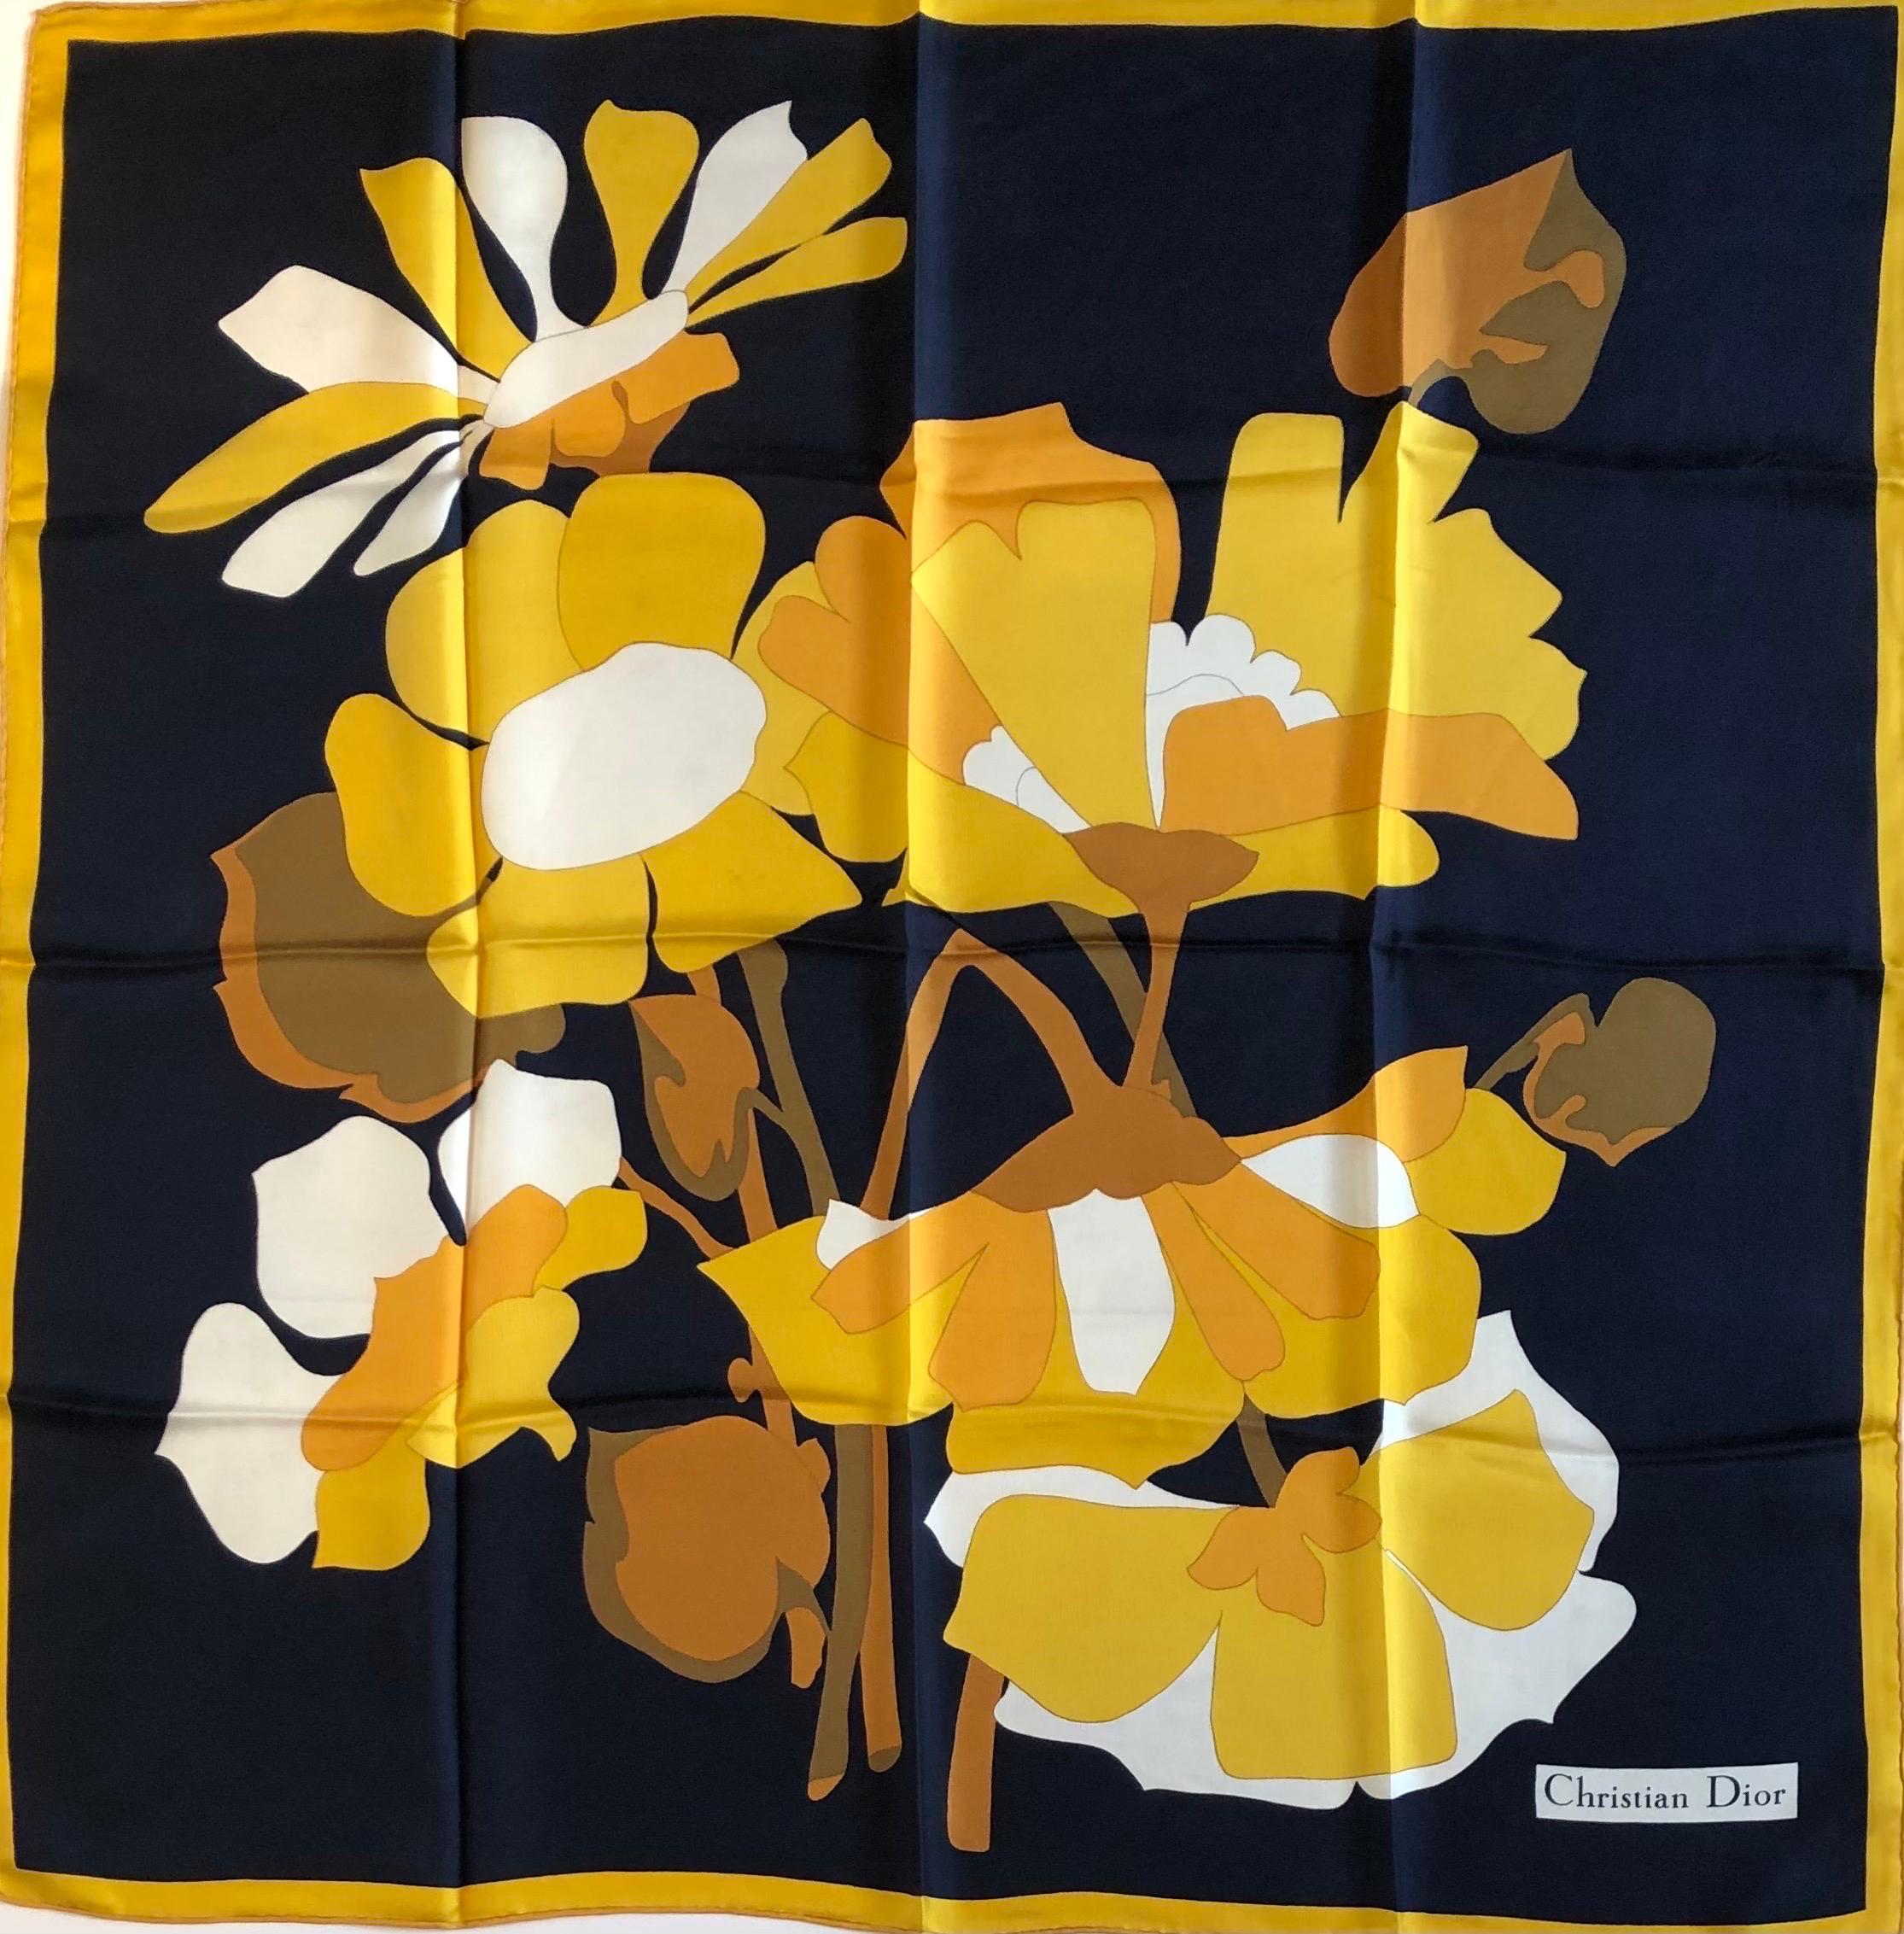 1970 CHRISTIAN DIOR Flower Multi Silk Printed Scarf 
Christian Dior luxurious silk scarf in stunning bright colour tone, navy blue, gold with off-white background and flower bouquet motifs print, 100% silk.  The CD Box in the photos is not for sale